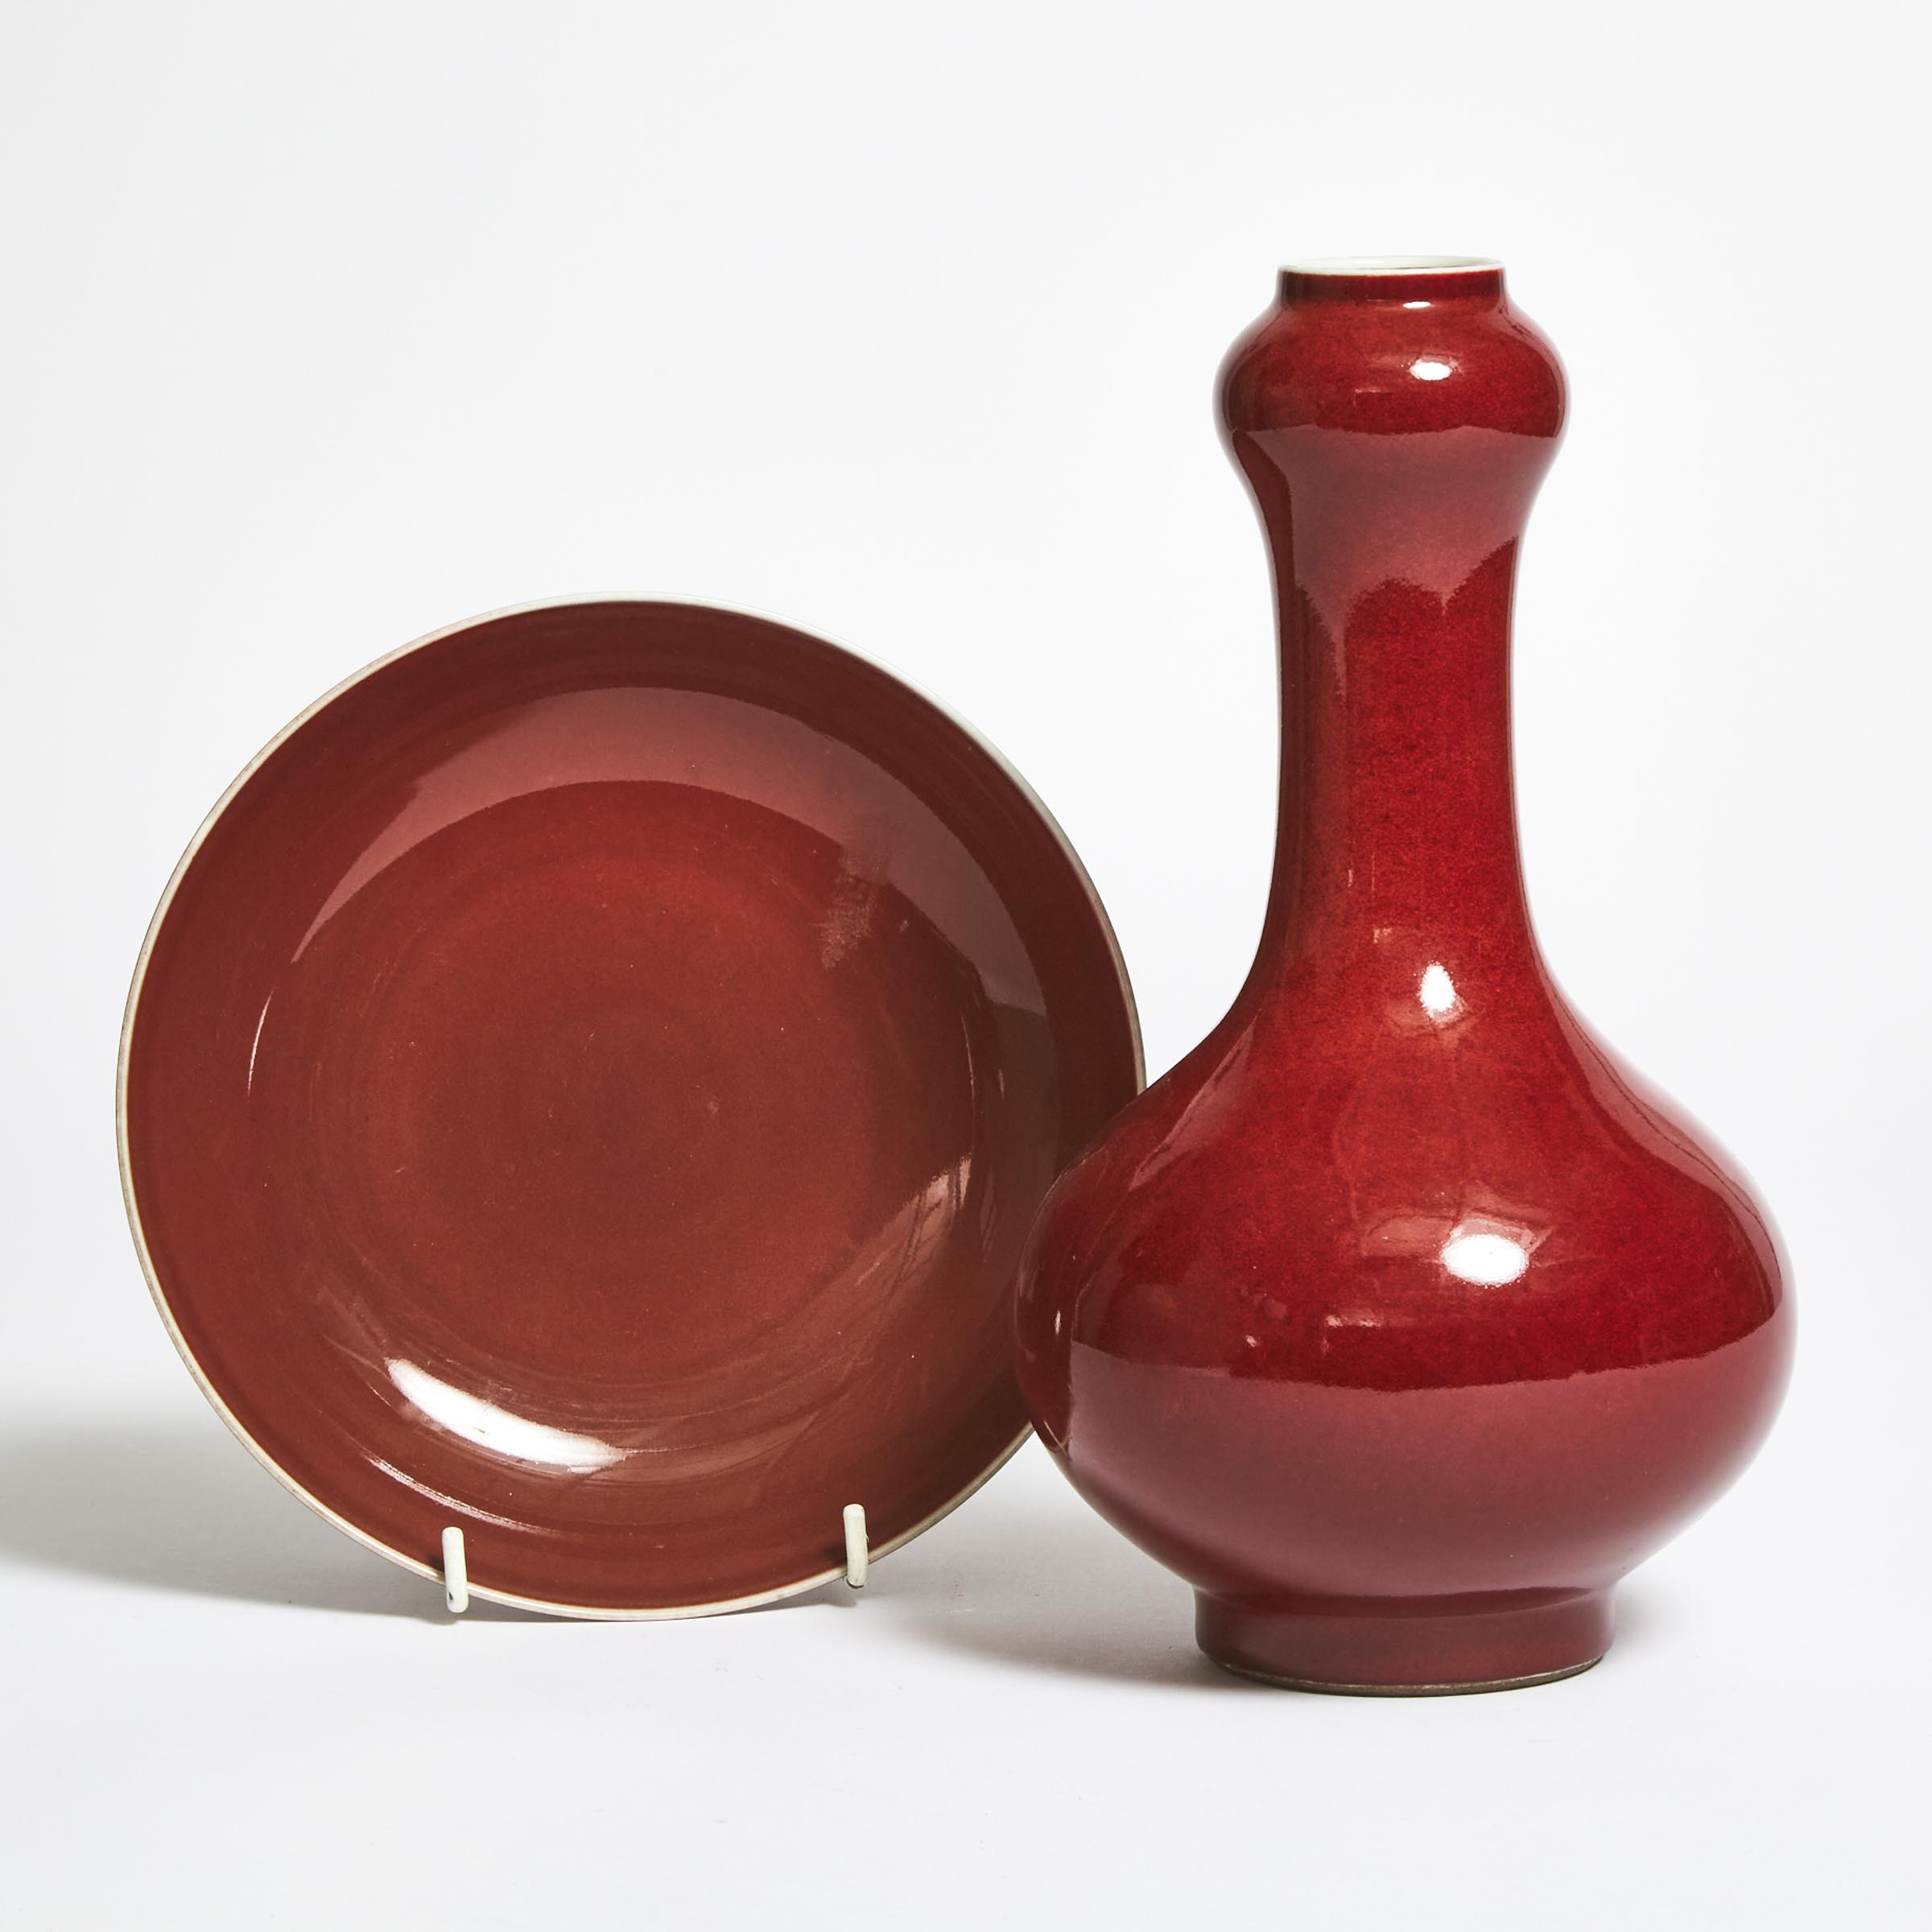 A Copper-Red Glazed 'Garlic-Mouth' Vase, Together With a Copper-Red Glazed Dish, 20th Century